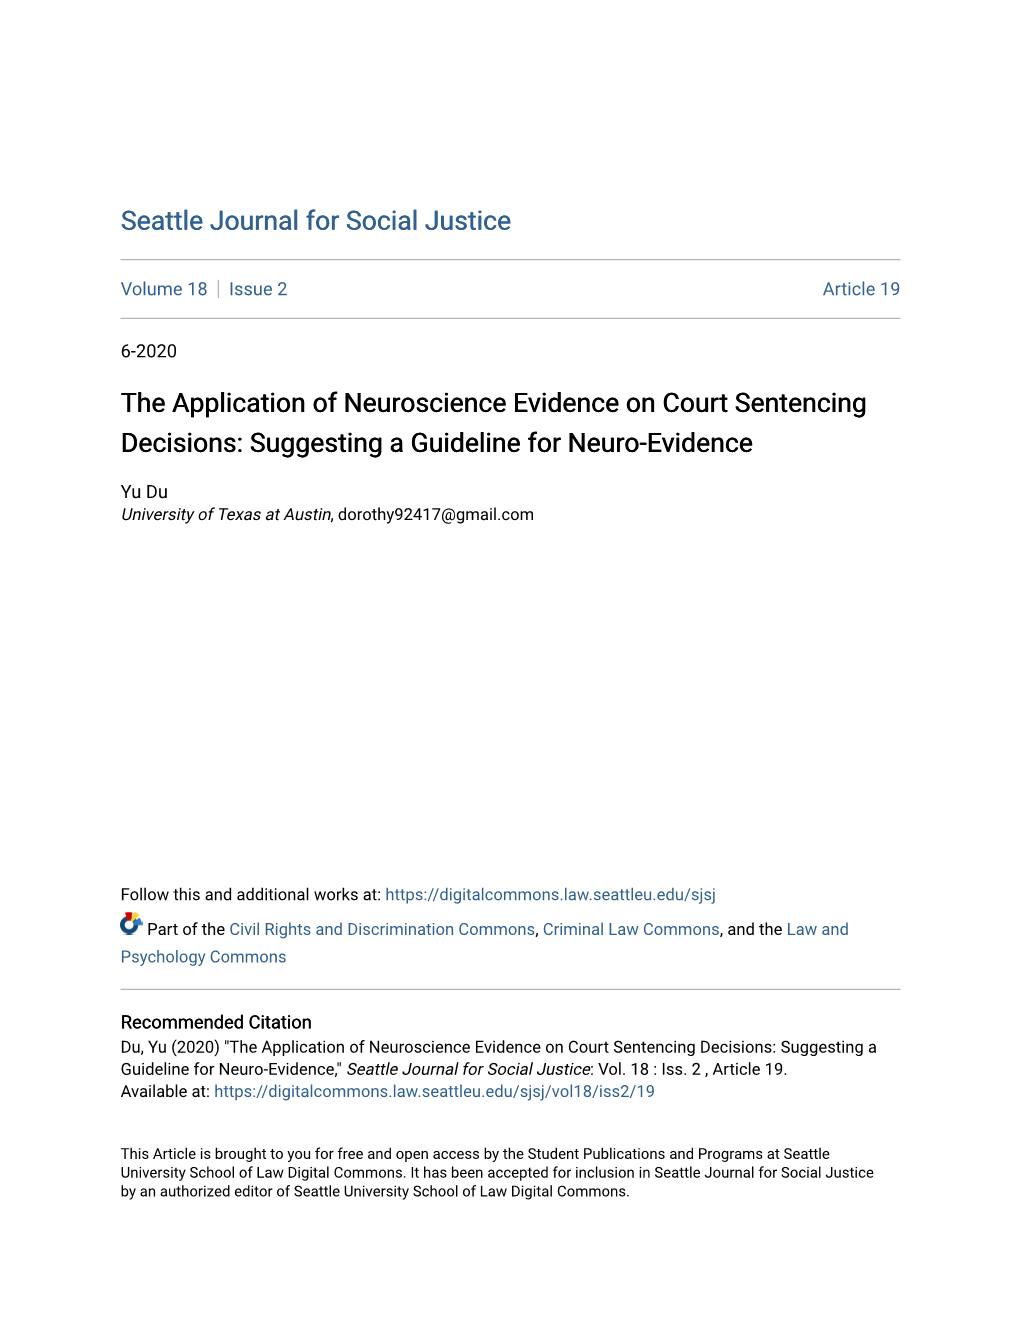 The Application of Neuroscience Evidence on Court Sentencing Decisions: Suggesting a Guideline for Neuro-Evidence